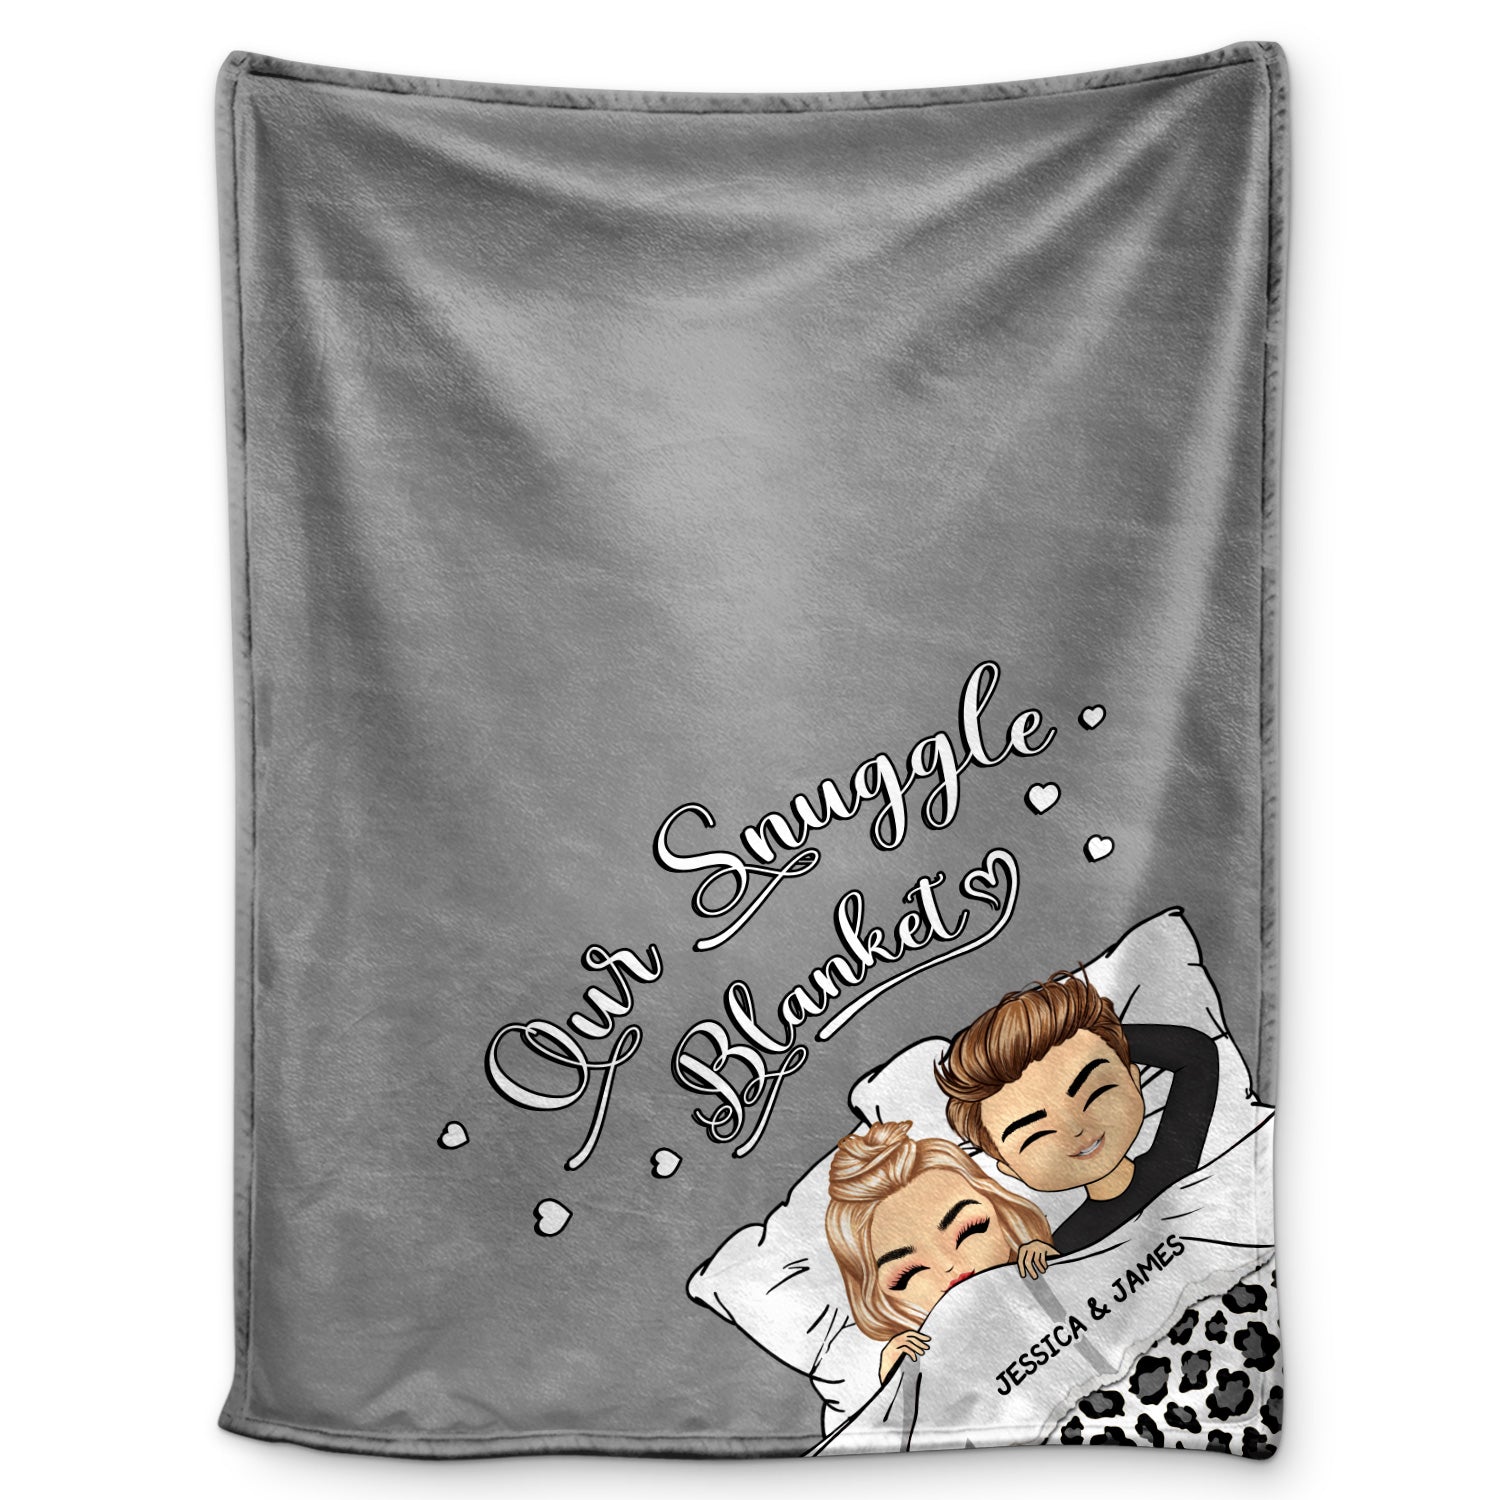 Couple Chibi Our Snuggle Blanket - Gift For Couples, Anniversary, Birthday Gift - Personalized Custom Fleece Blanket